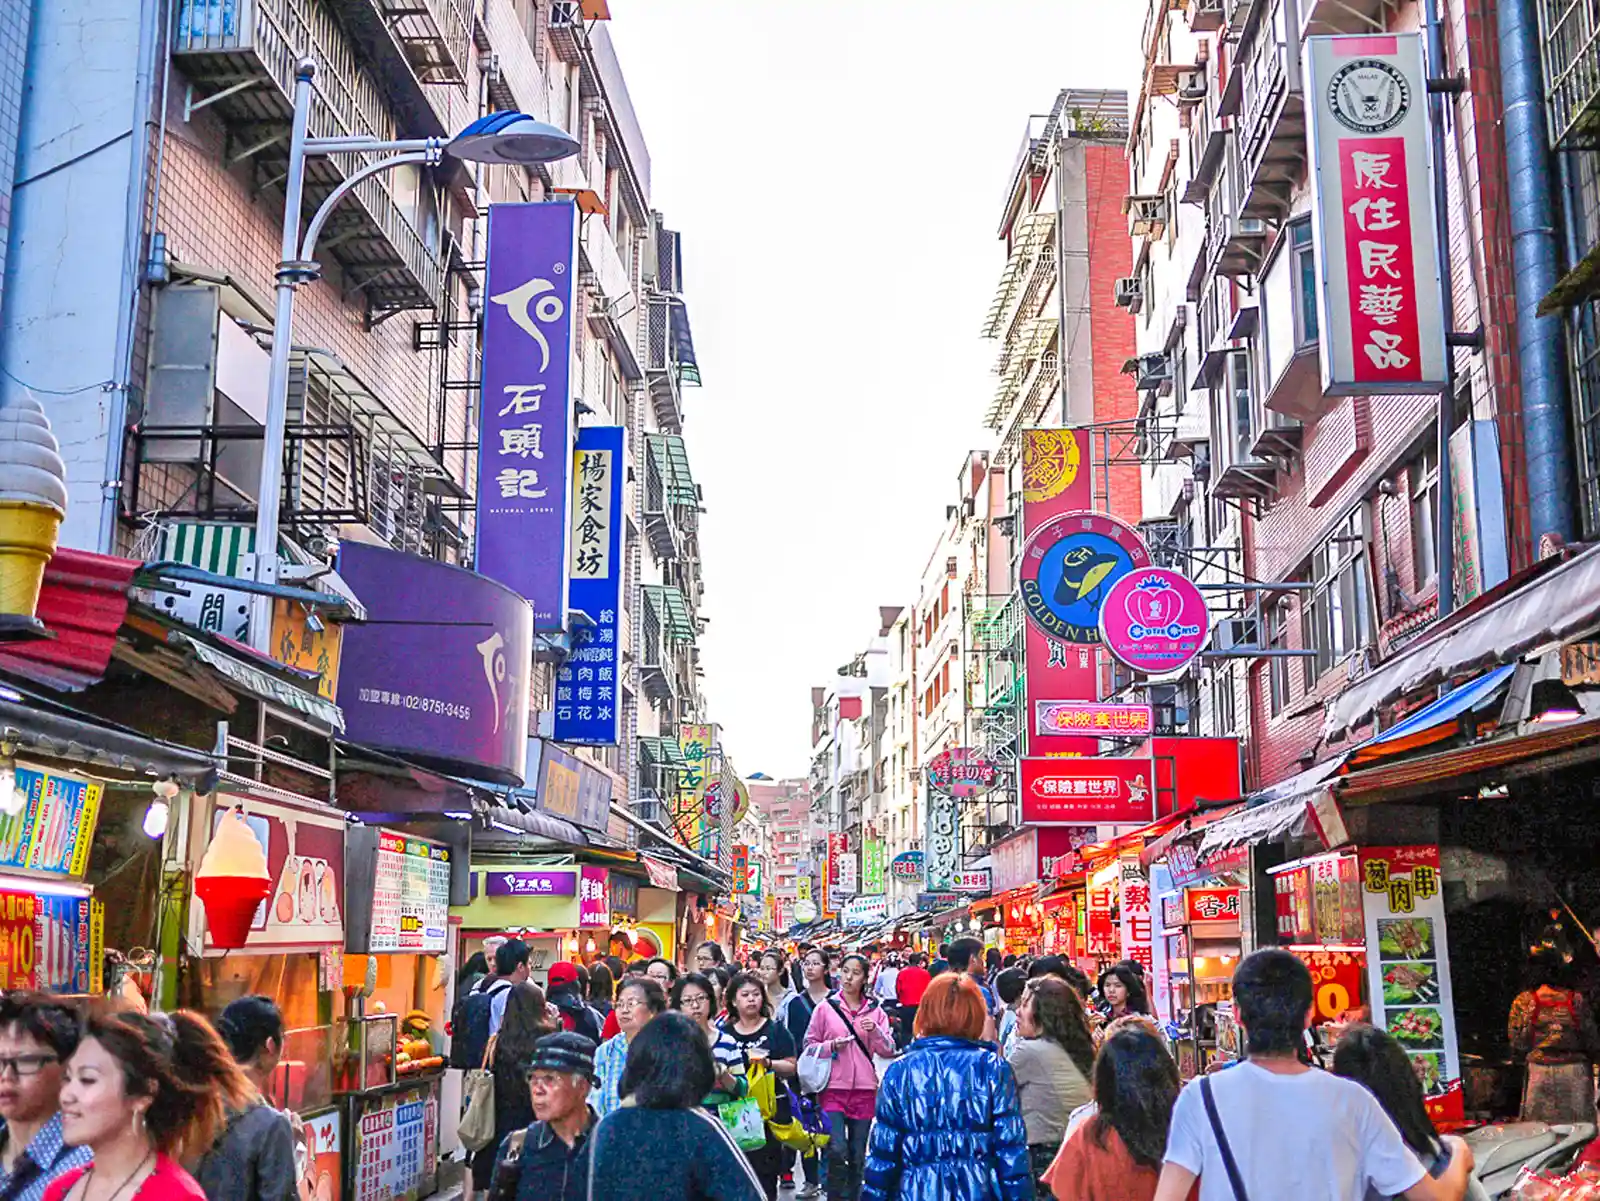 Crowds of people walk through Tamsui's rather modern-looking old street.